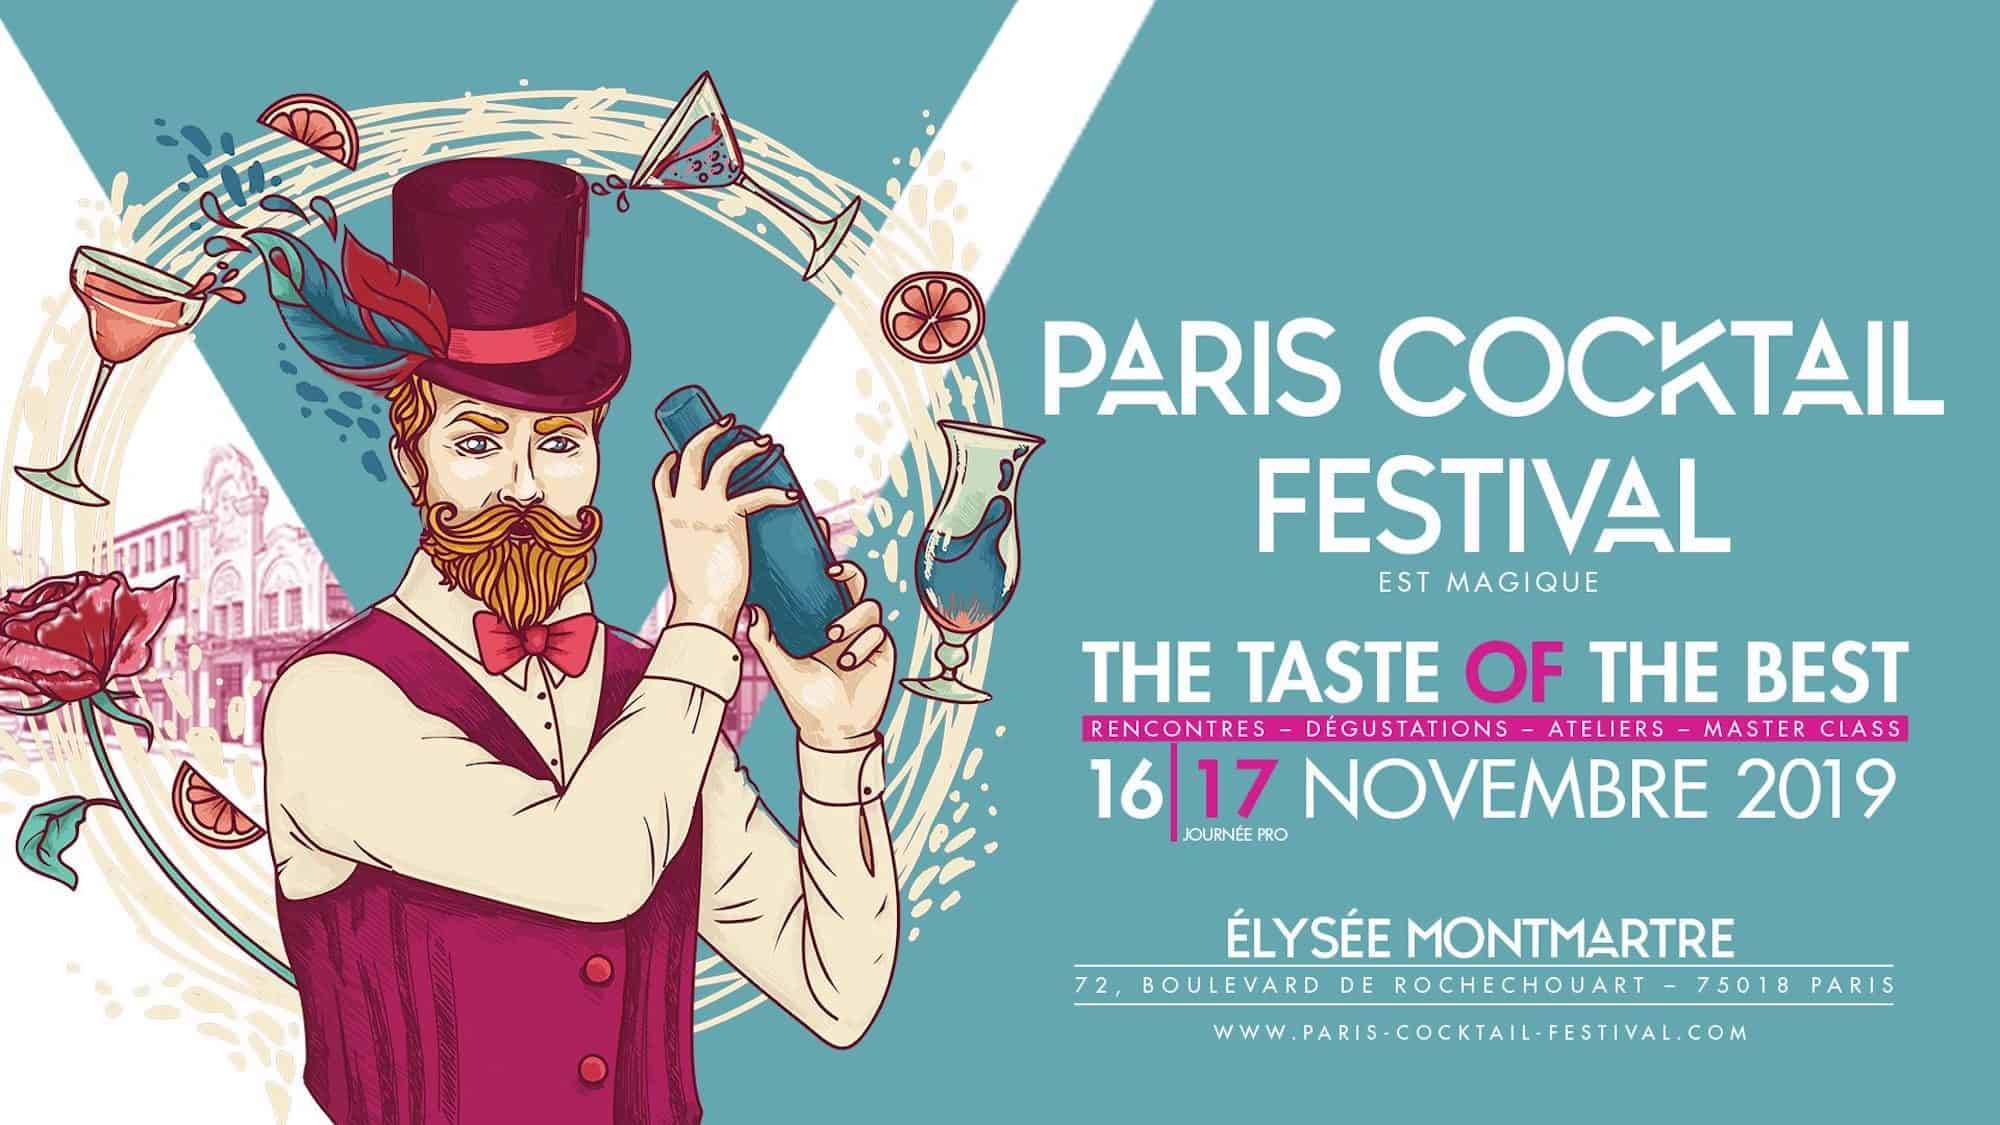 The poster for Paris Cocktail Festival which takes place each November at the Elysée Montmartre.